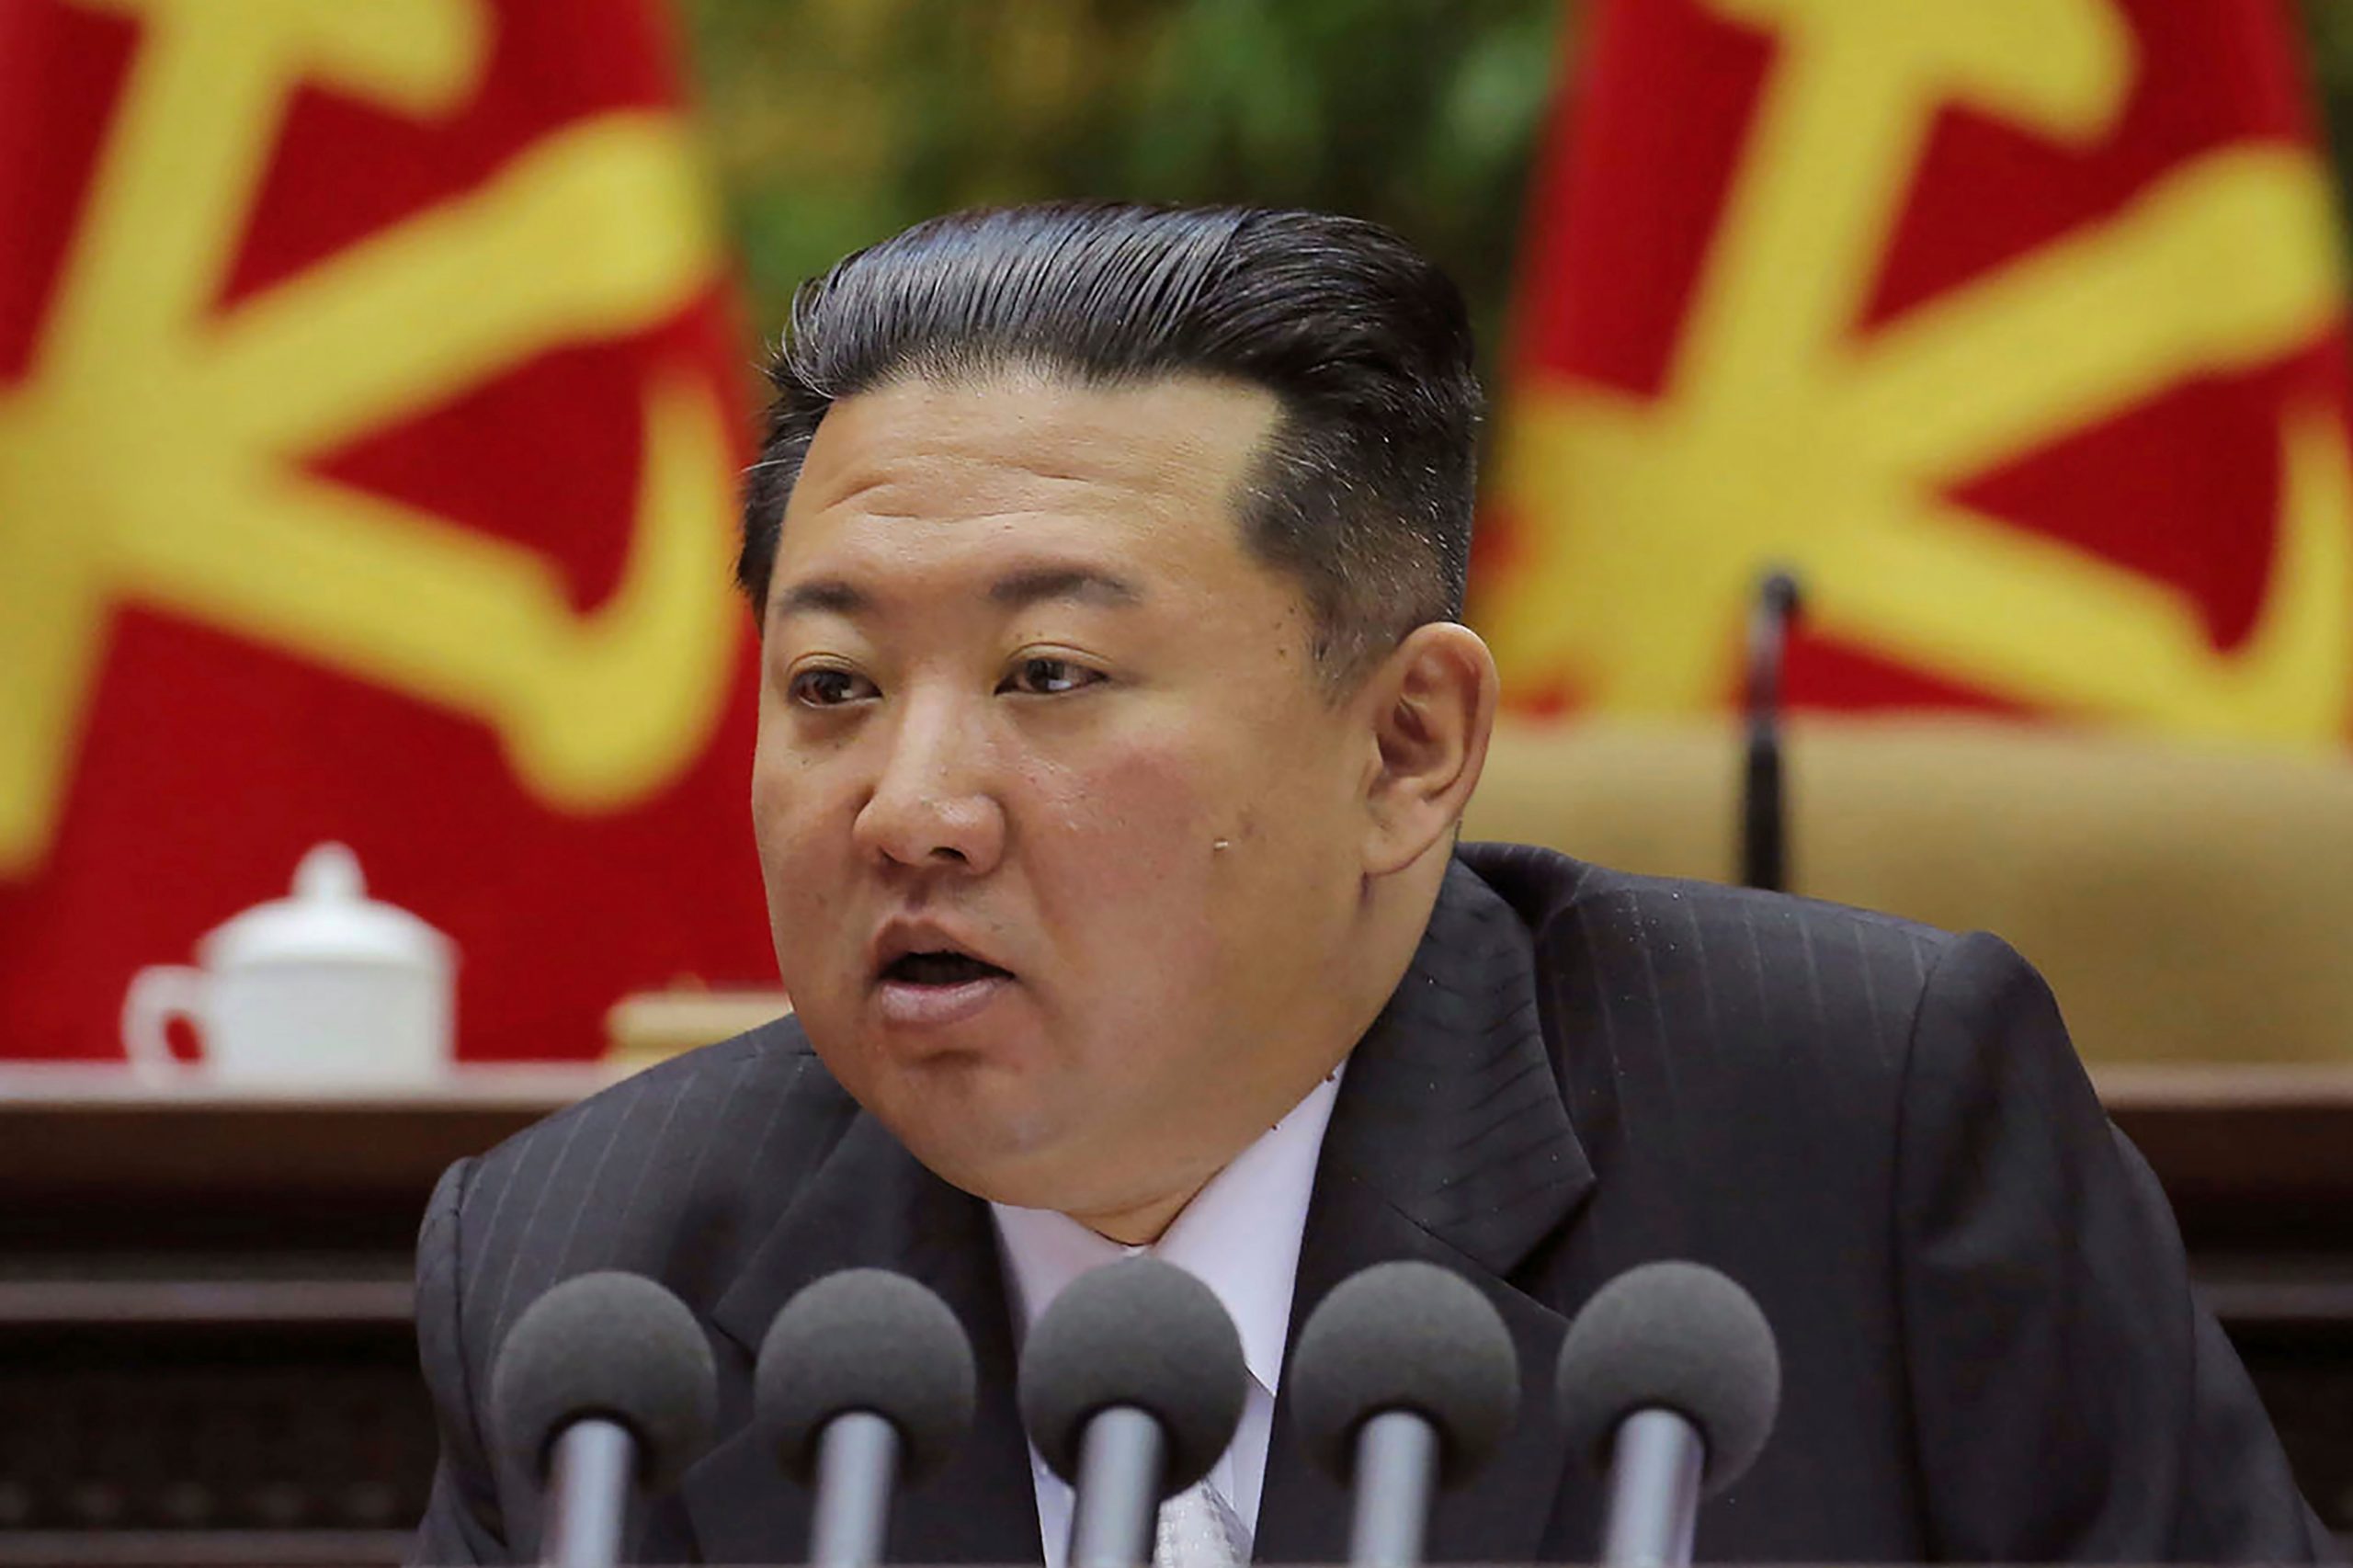 North Korea ramps up production of medicines and supplies to fight Covid: Report